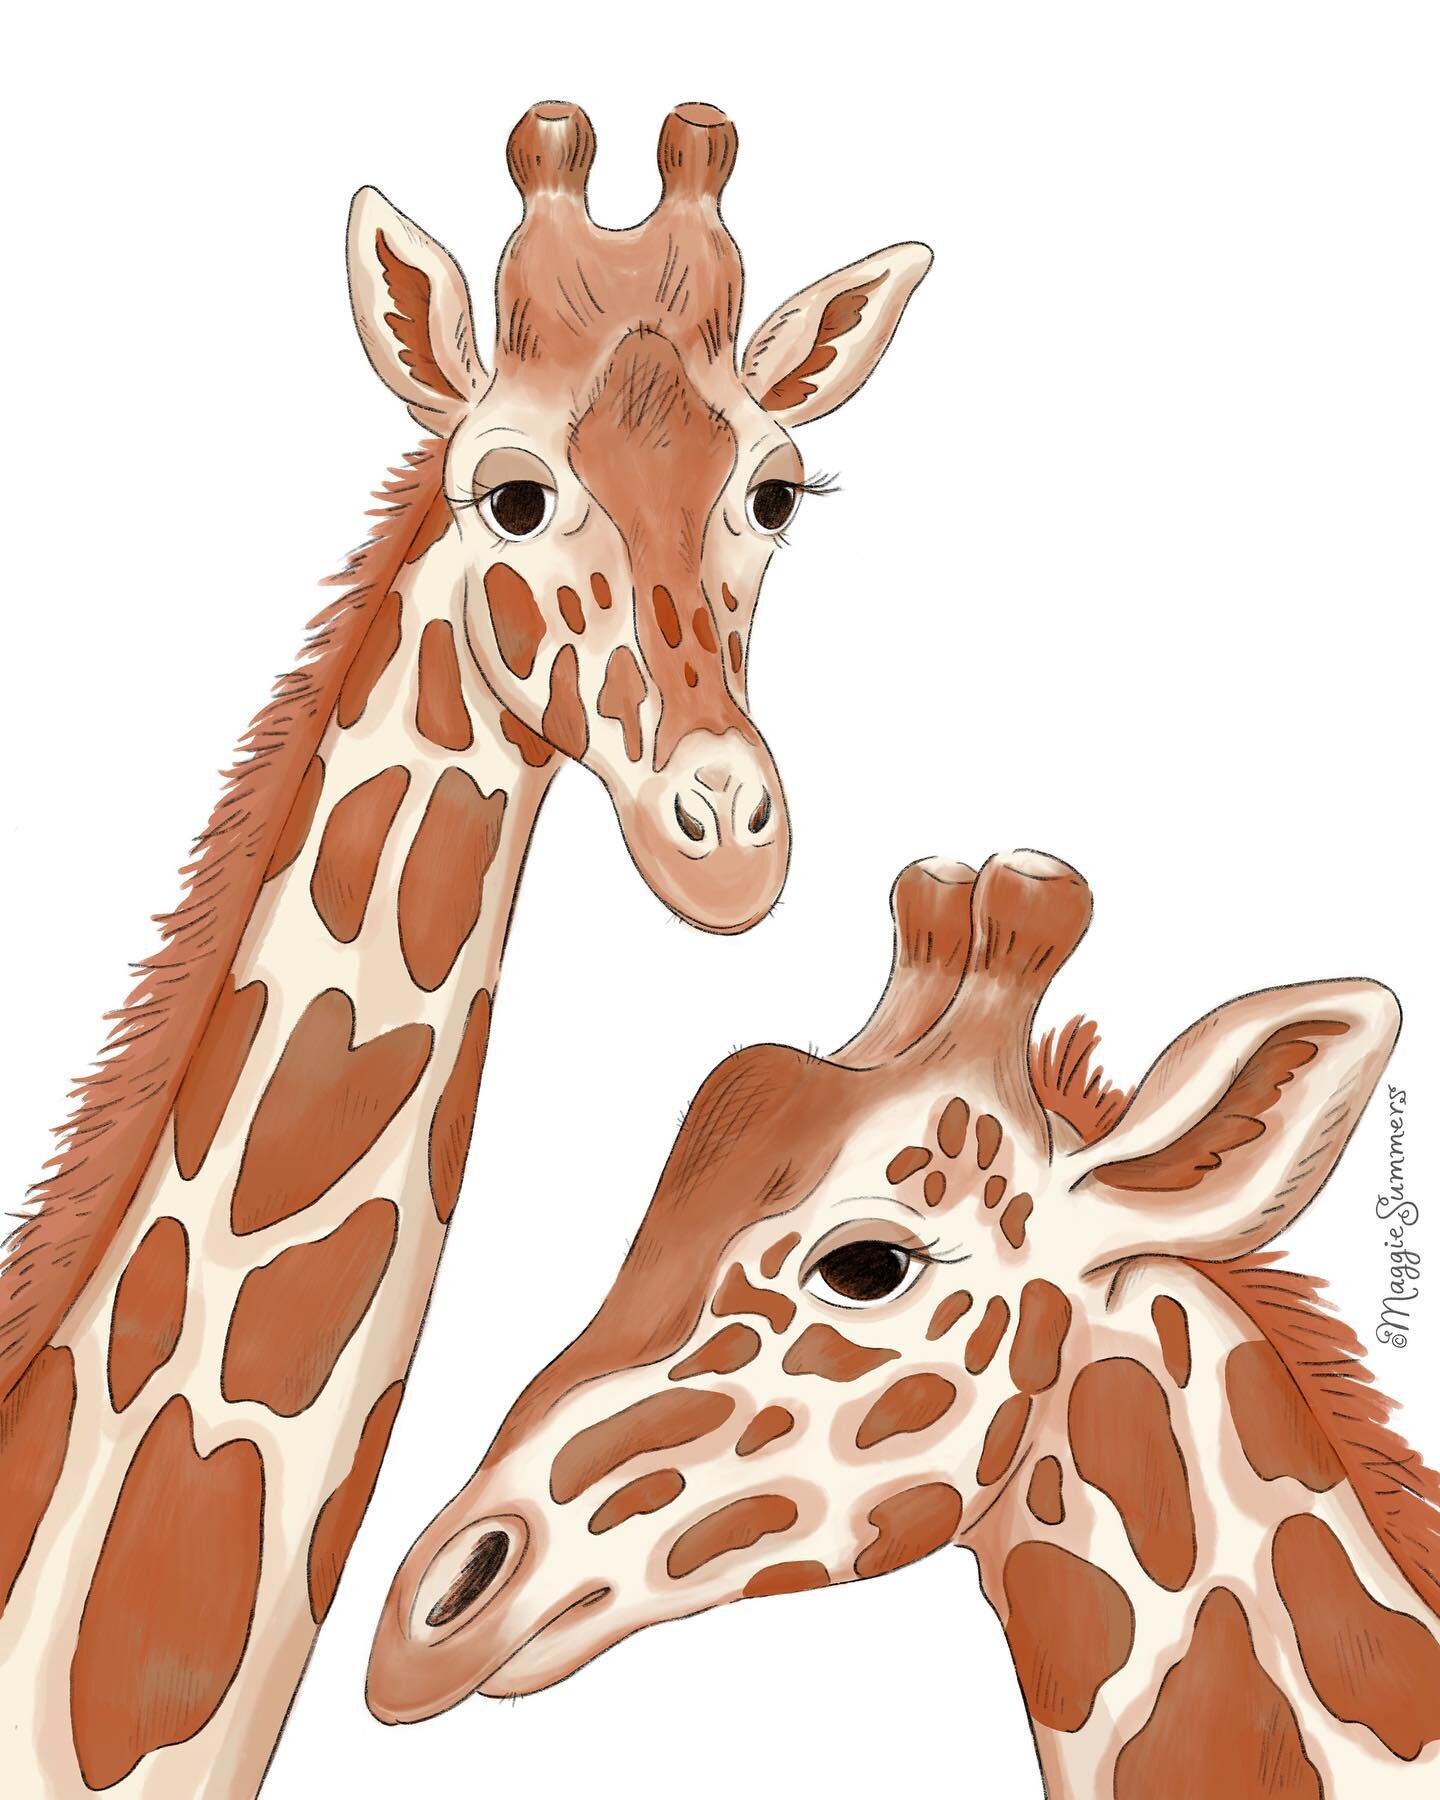 Giraffes are amazing and beautiful aren&rsquo;t they? They are the tallest mammals in the world. Did you know a giraffe&rsquo;s neck is too short to reach the ground? I&rsquo;ve included a short video of them in my stories.▫️
.
.
.
.
.
.
.
.
.
#maggi